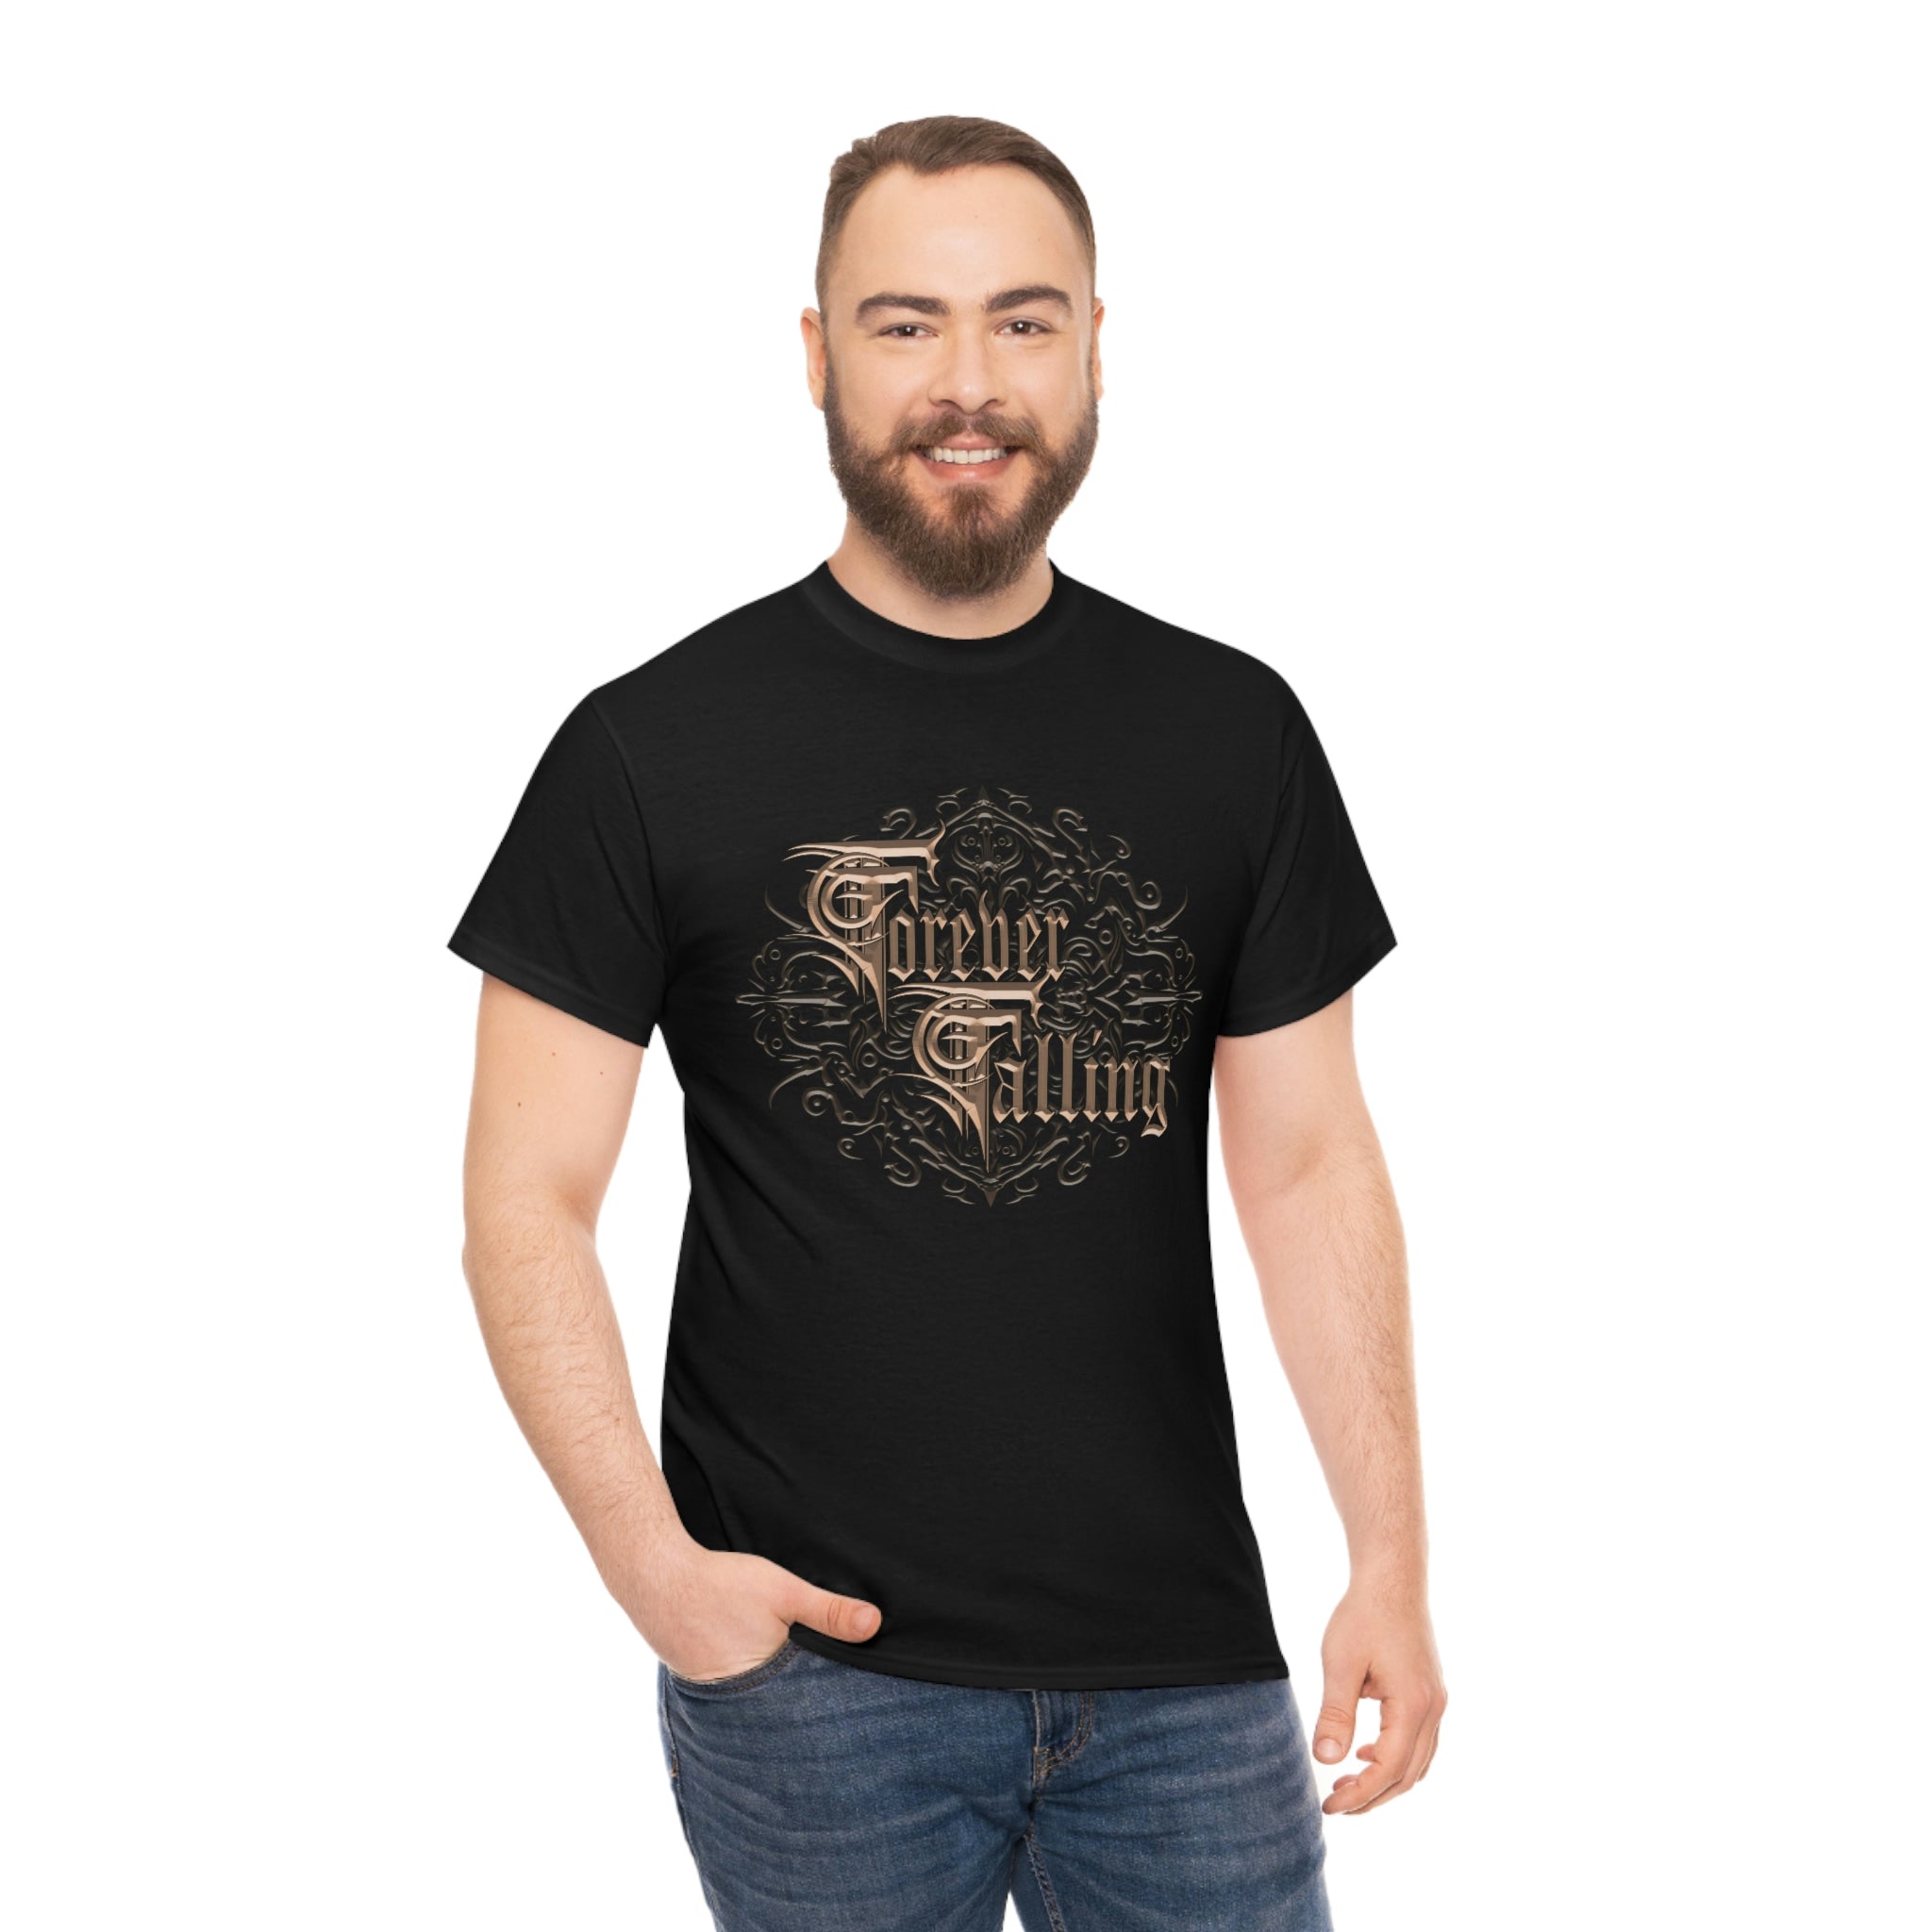 Forever Falling - Cotton Tee (US/CANADA/MEXICO) – Metal Nations